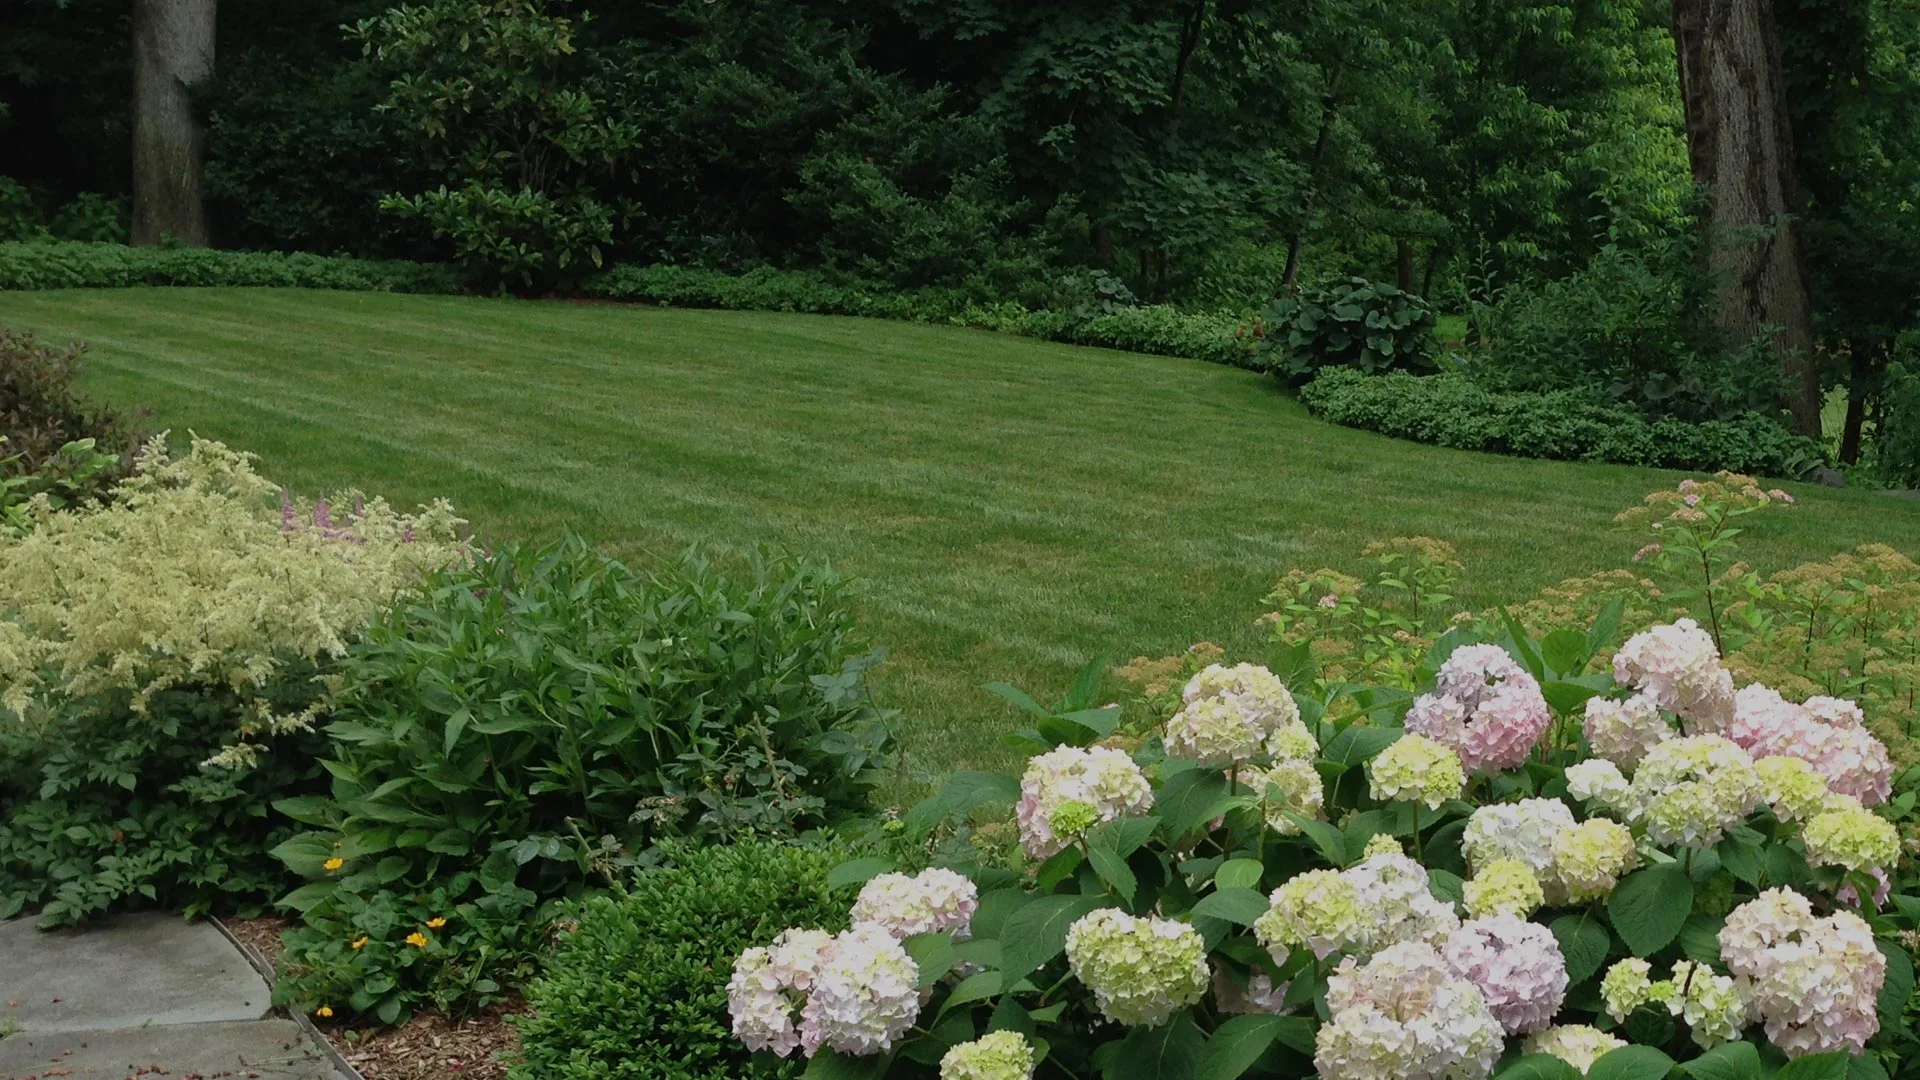 New Providence, NJ home lawn with regular care and maintenance.